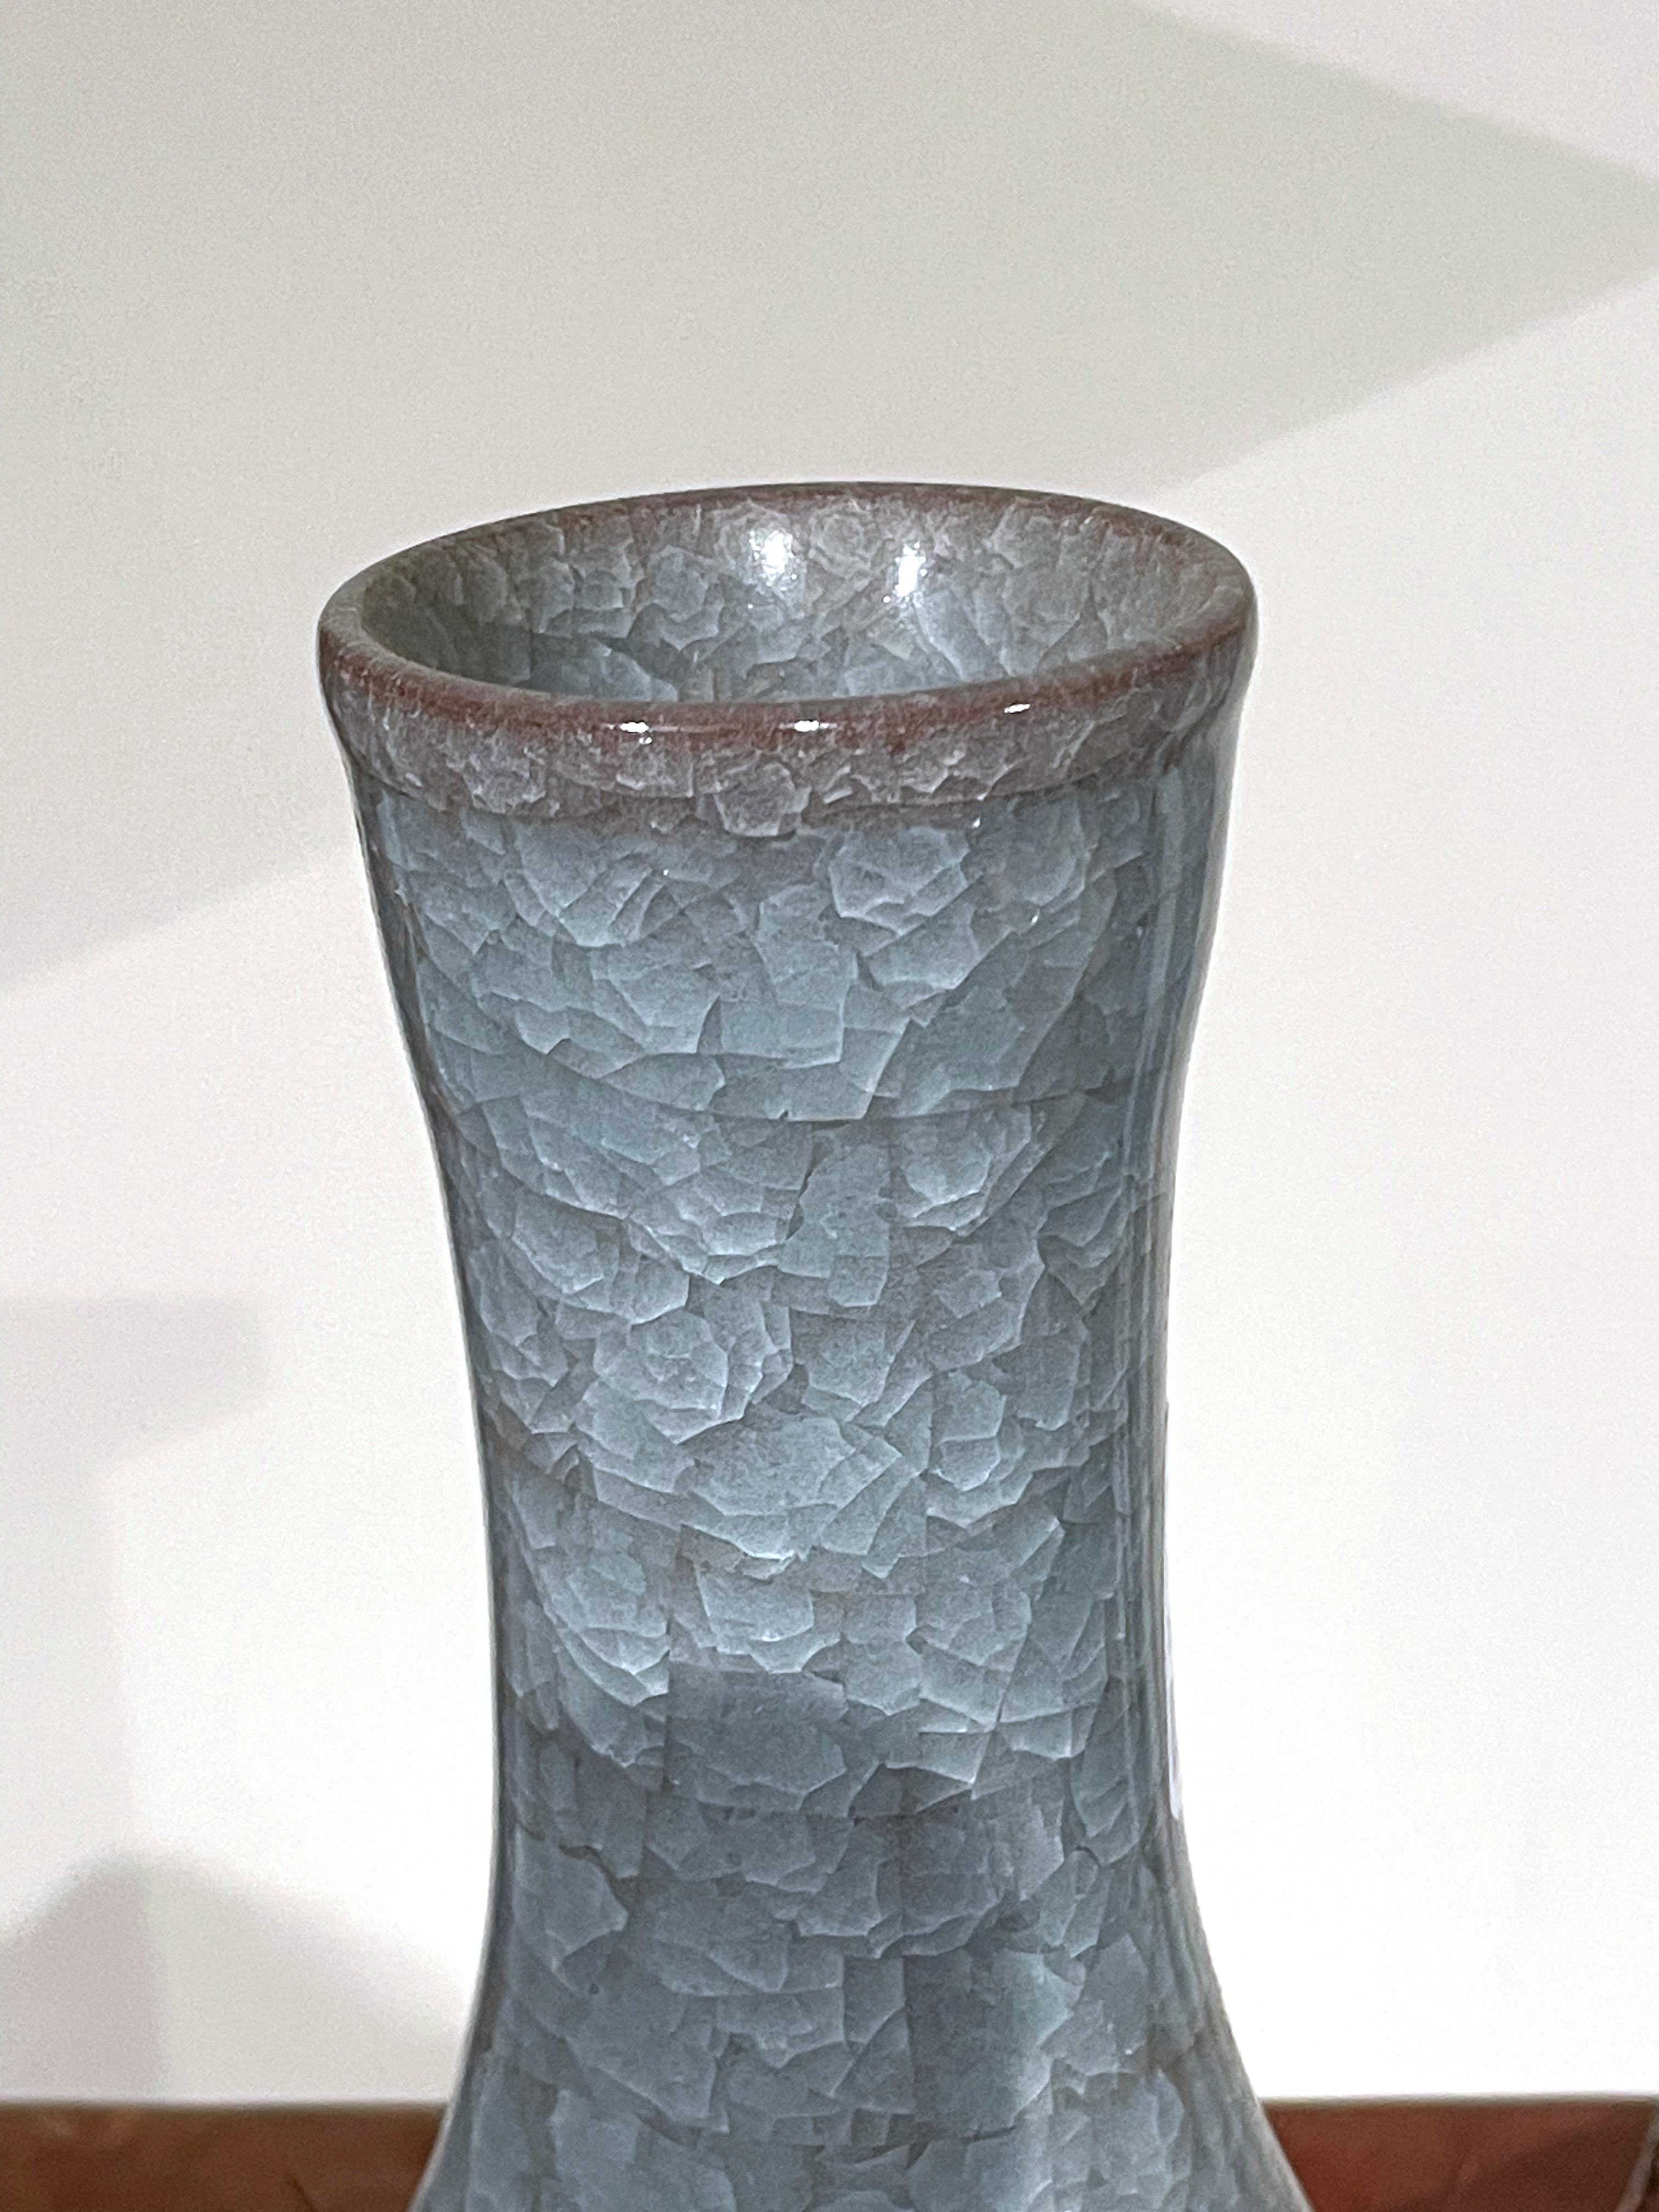 Contemporary Chinese blue vase with crackle glaze.
Classic funnel neck.
From a large collection with varying shapes and sizes.
ARRIVING APRIL